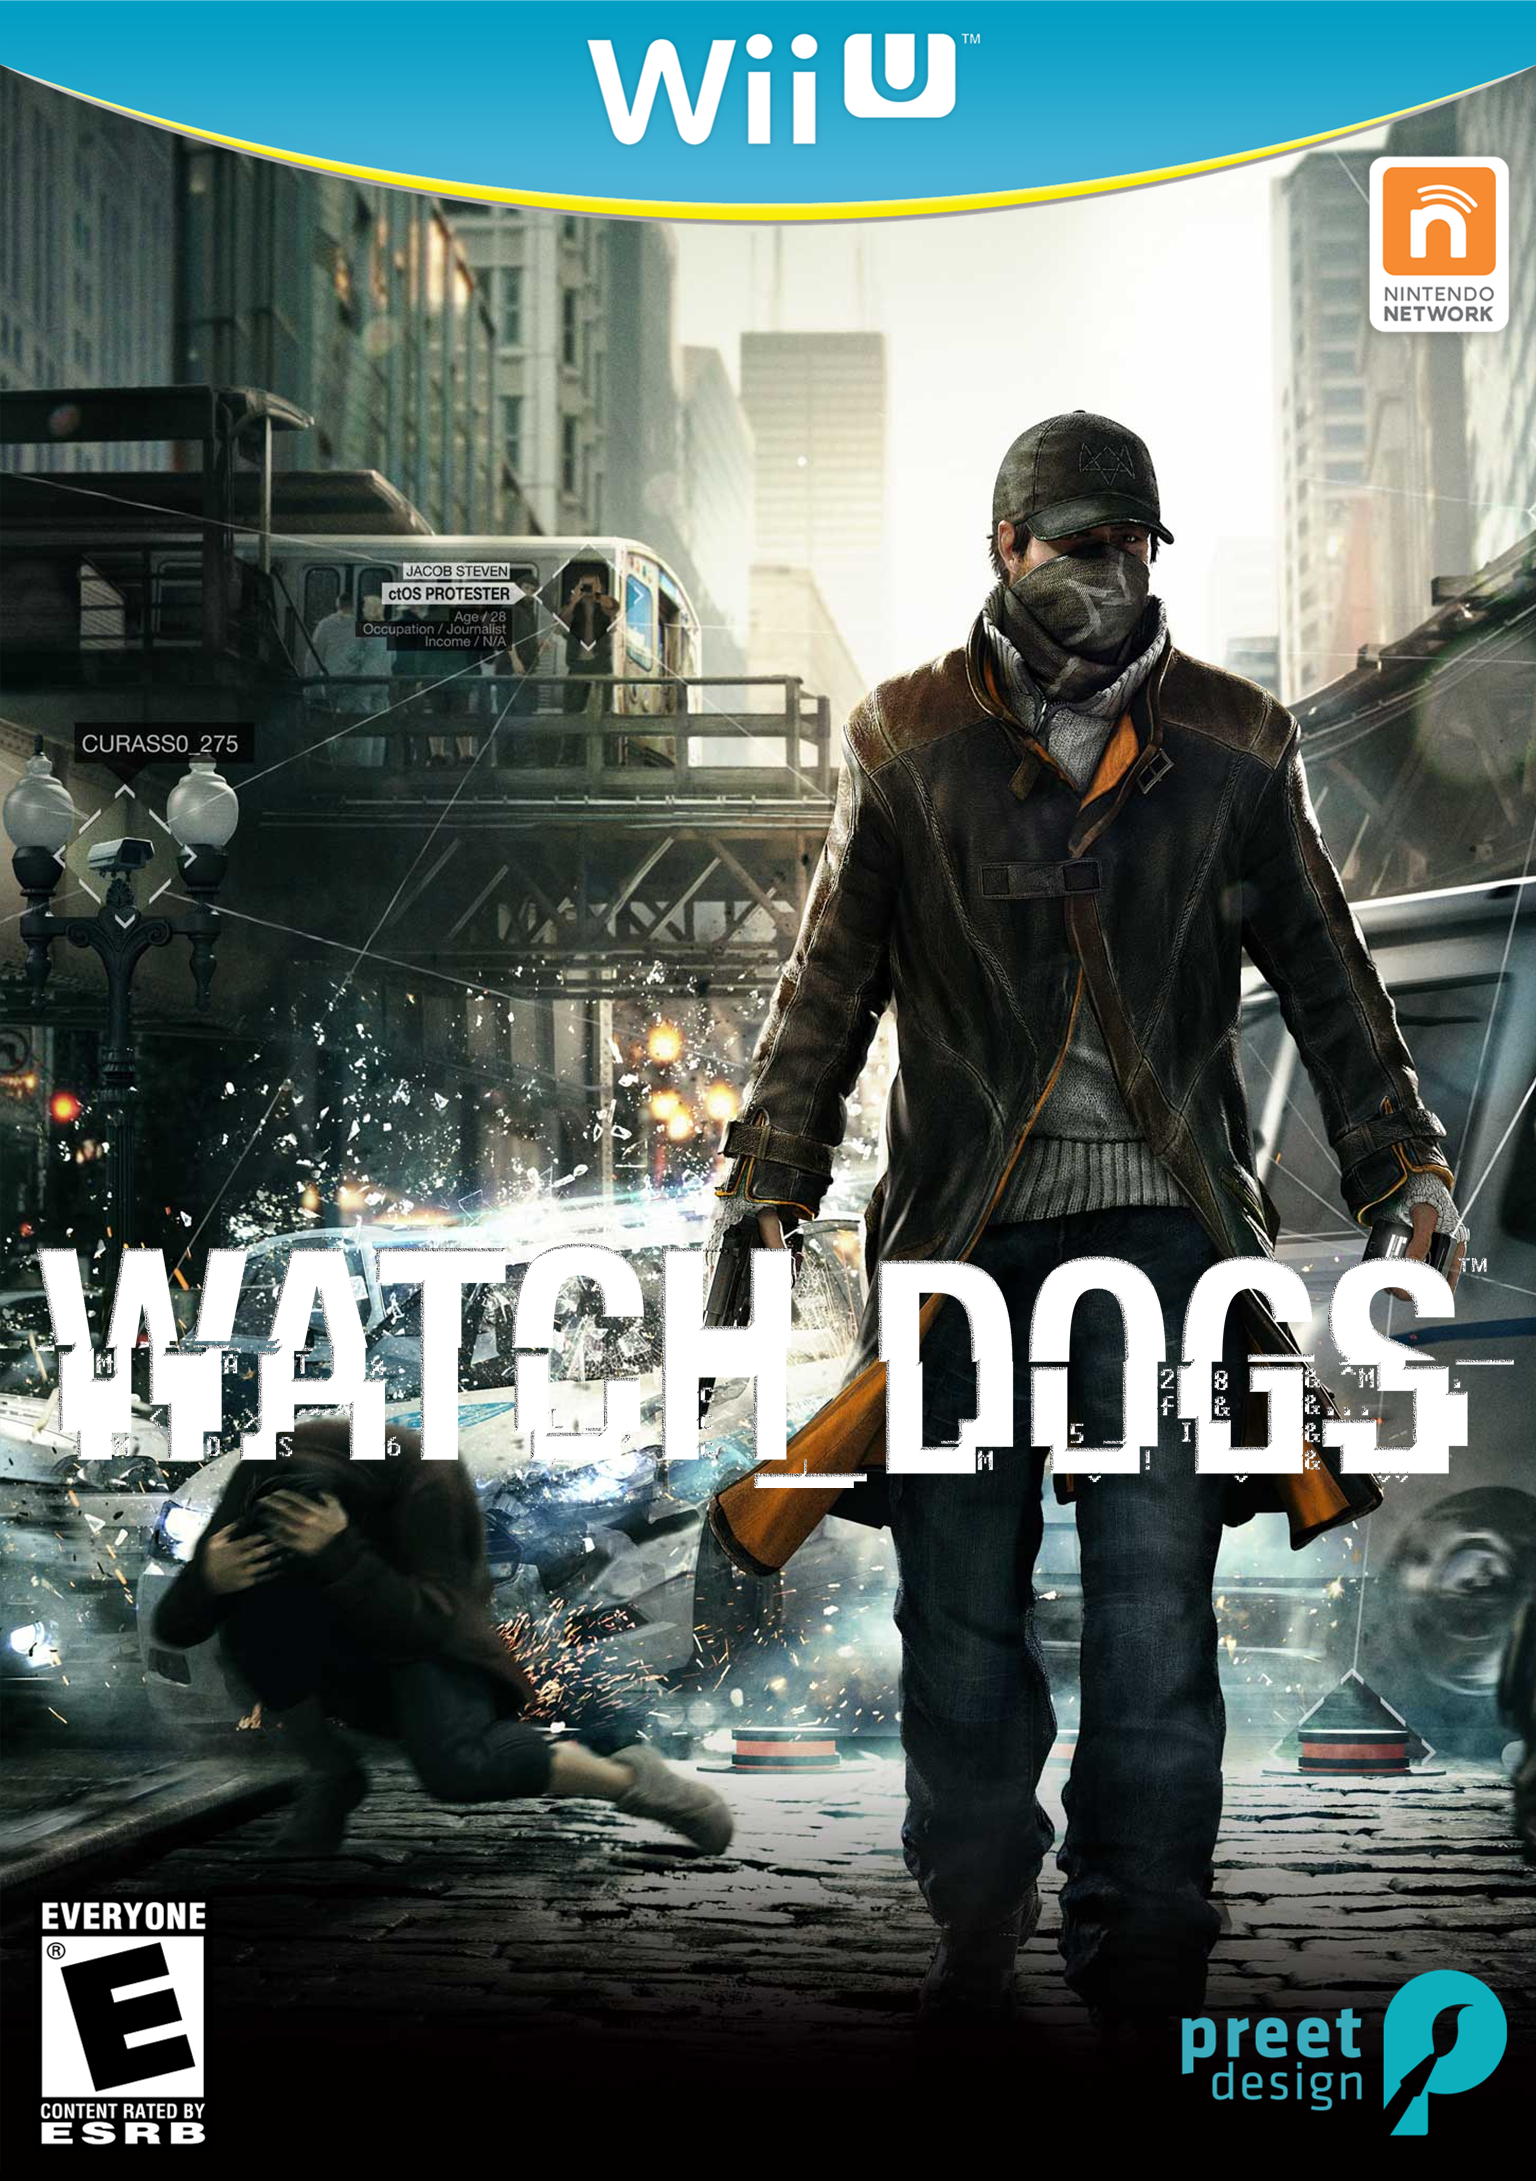 Watch Dogs box cover